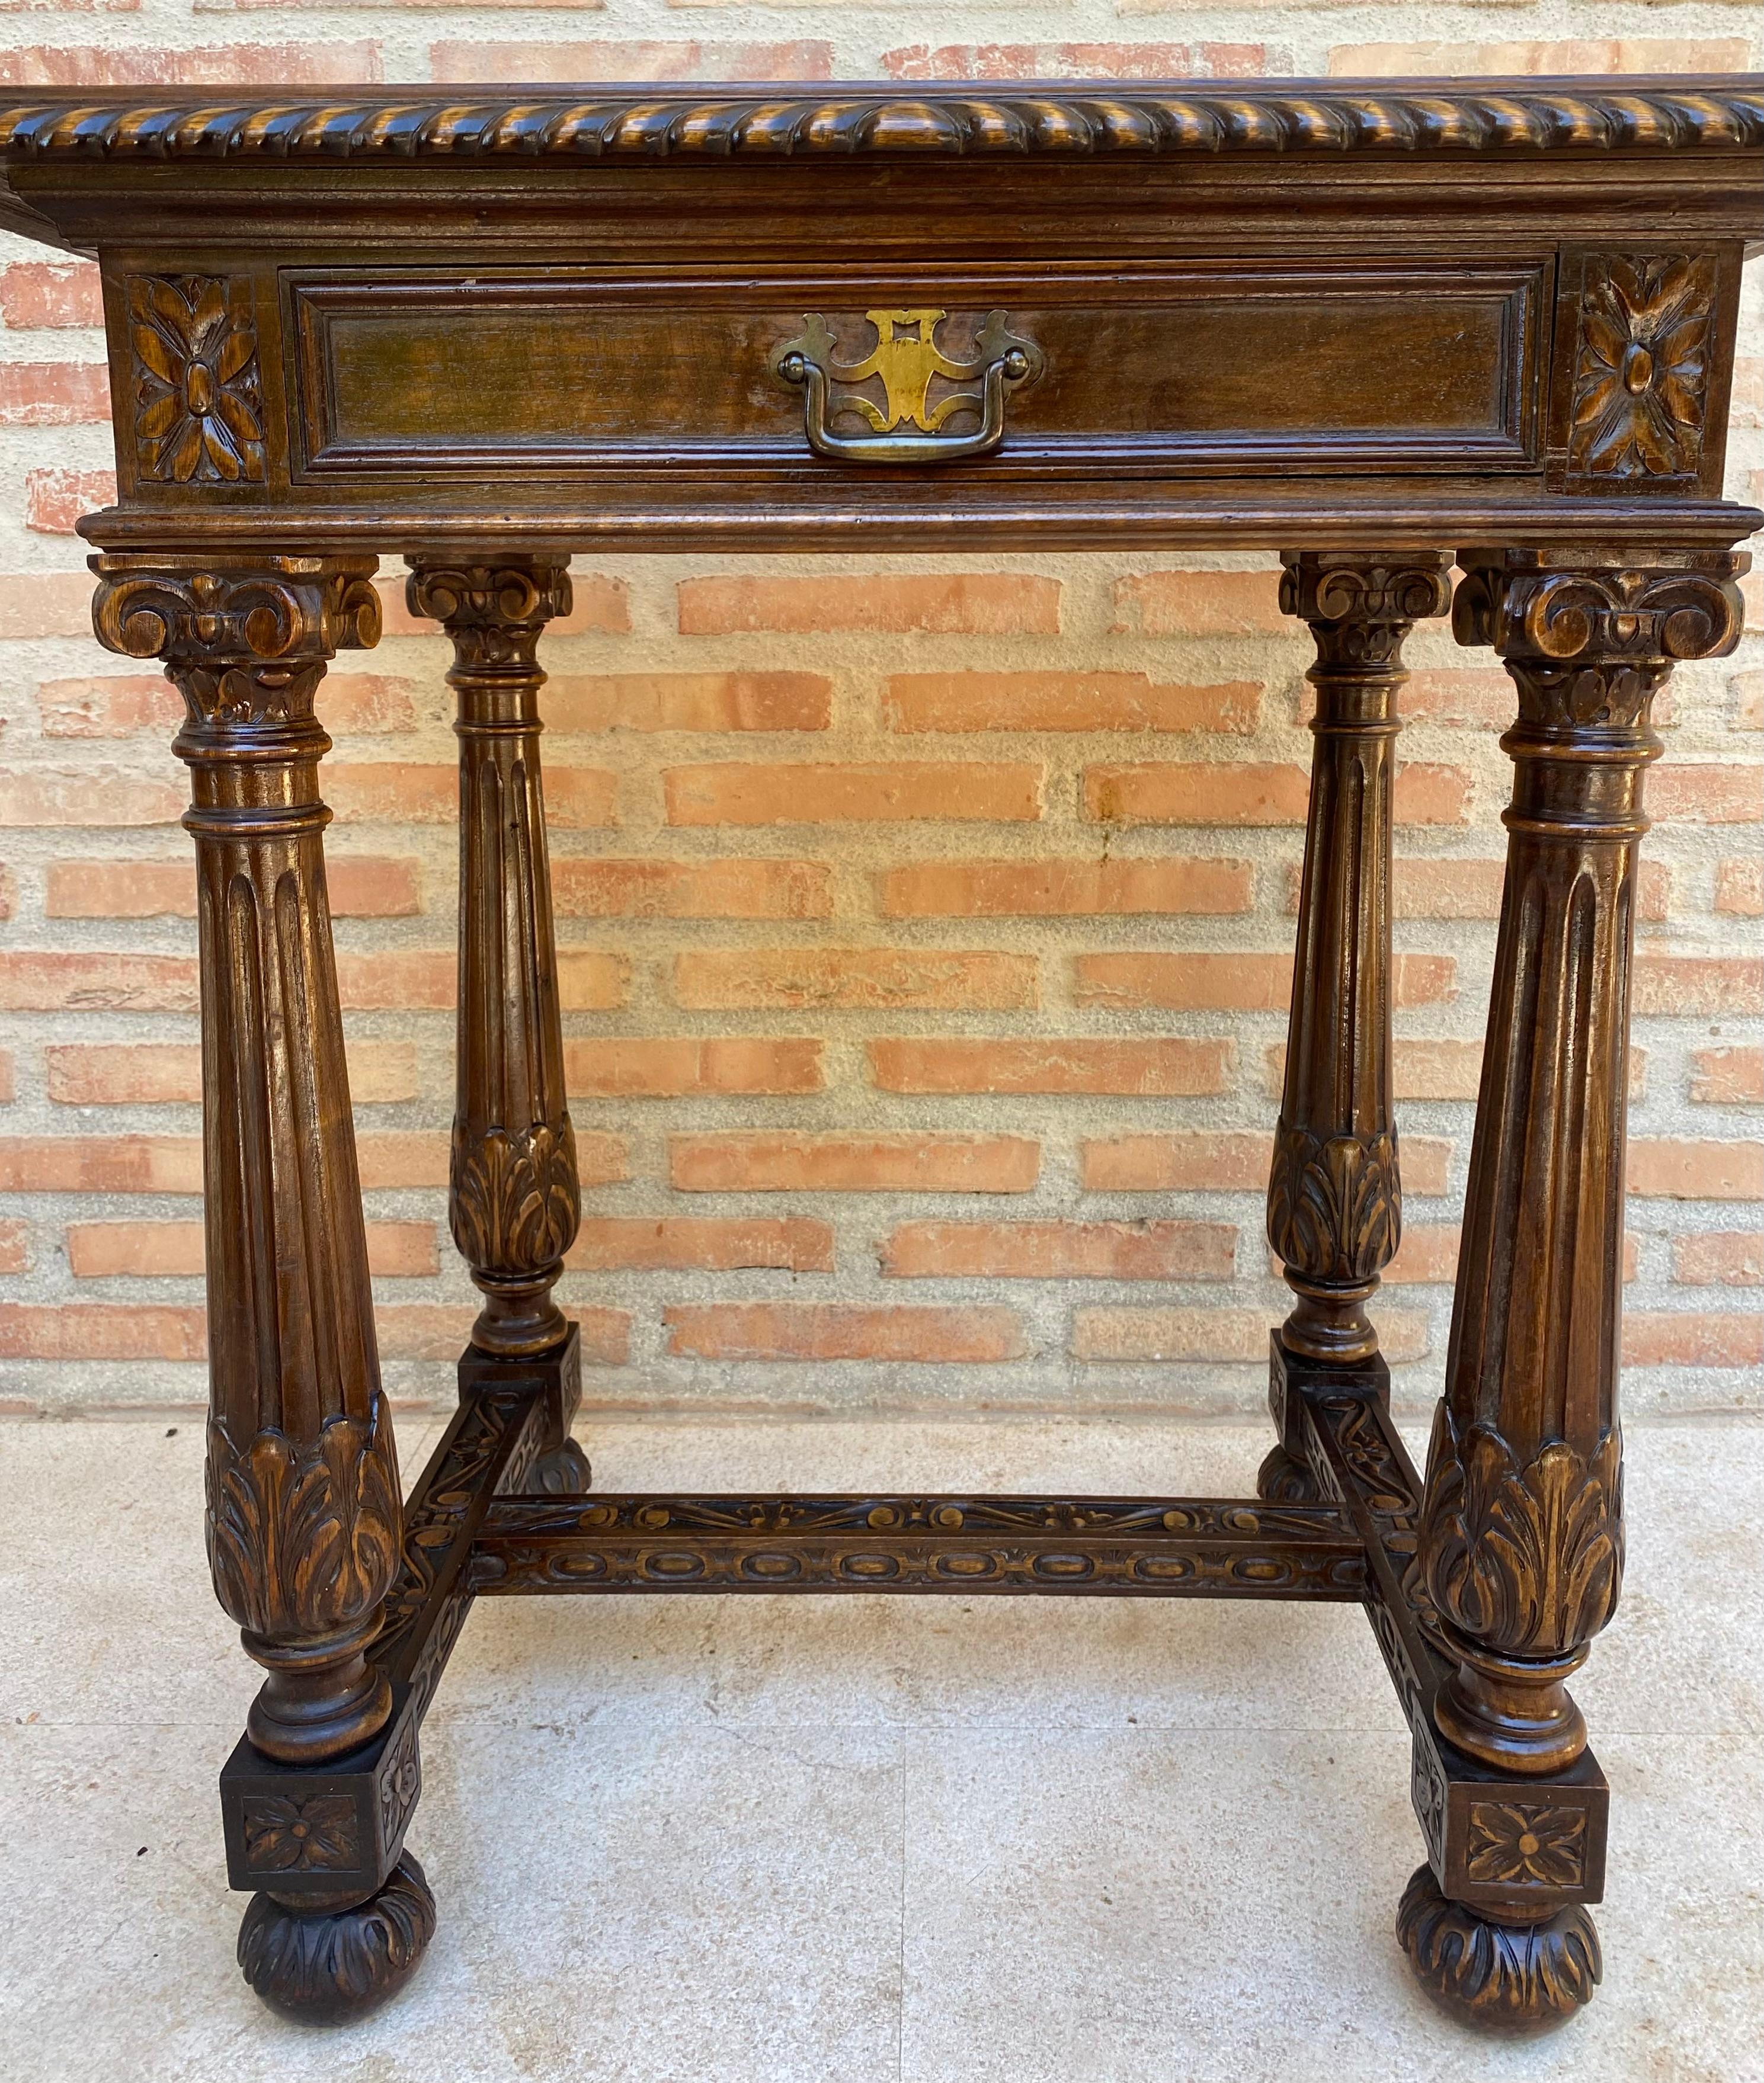 Early 20th Century Spanish Carved Walnut Side Table with One Drawer, 1940s
Spanish side table from the early 20th century with a drawer and iron fittings.
Beautiful table that you can use as a night table or side tables, auxiliary table for table